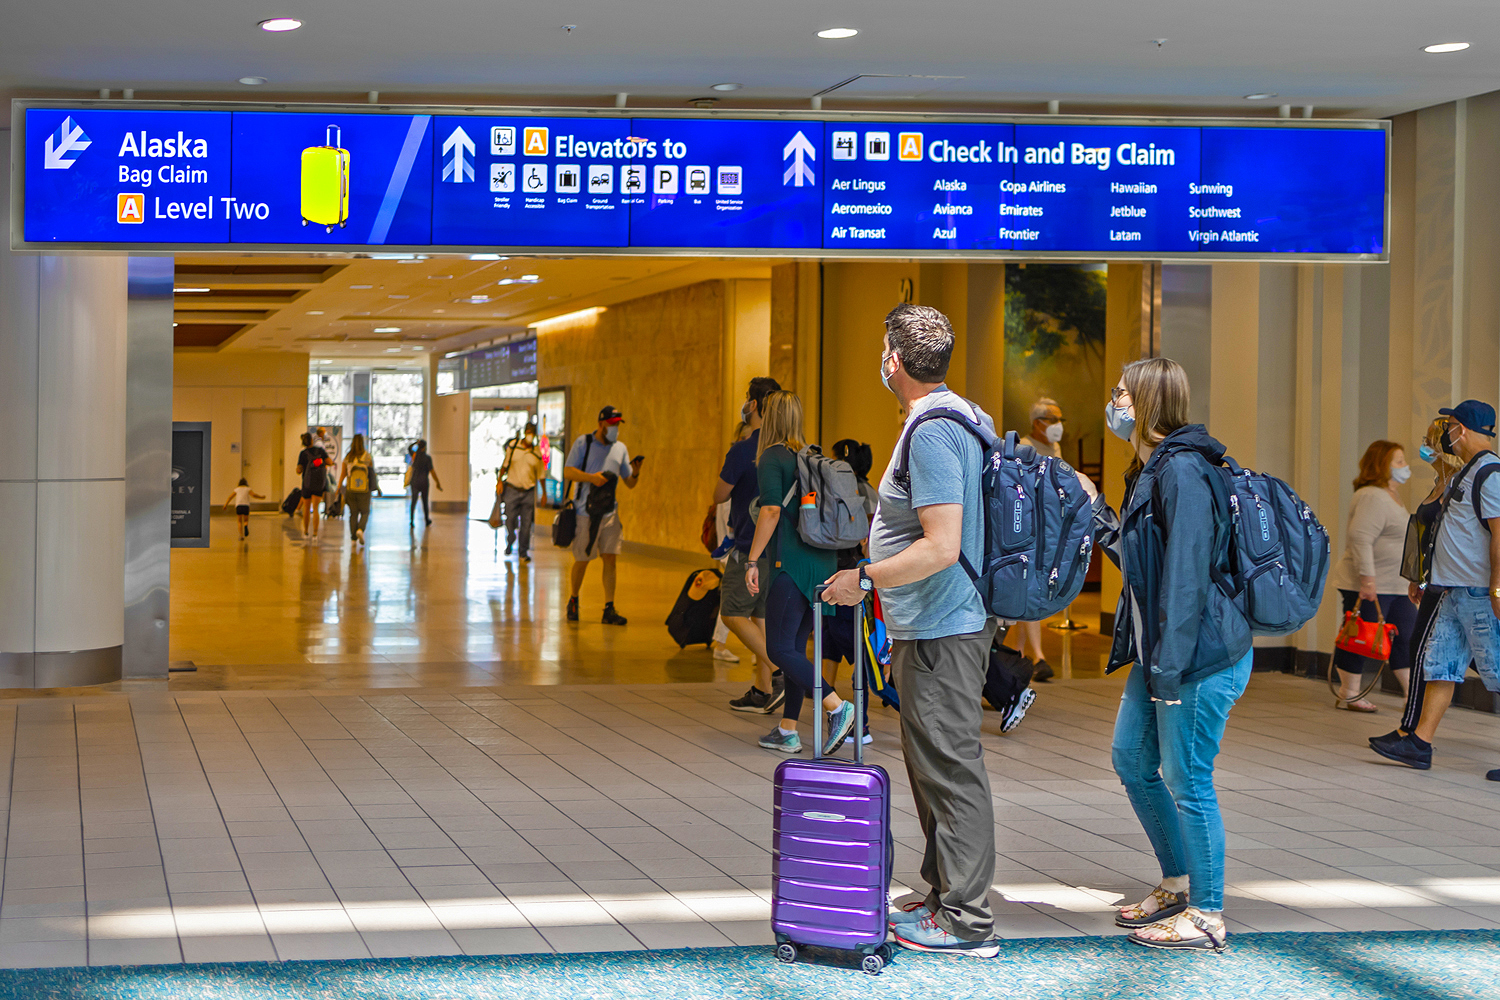 Large display systems in various configurations provide improved wayfinding, as well as engage and entertain waiting passengers.